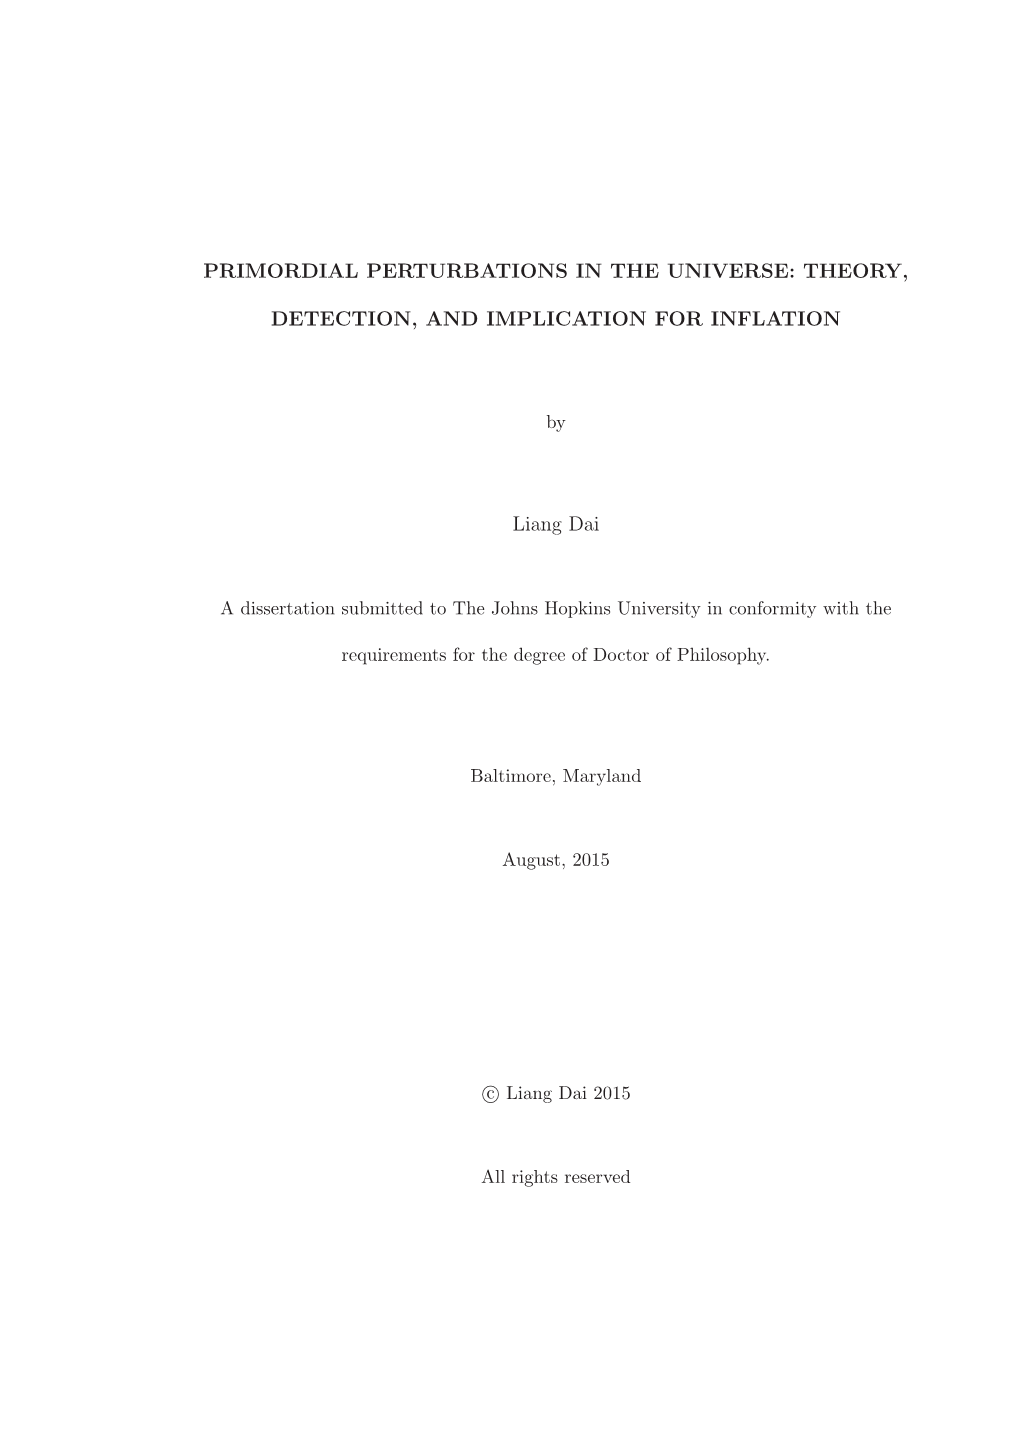 Primordial Perturbations in the Universe: Theory